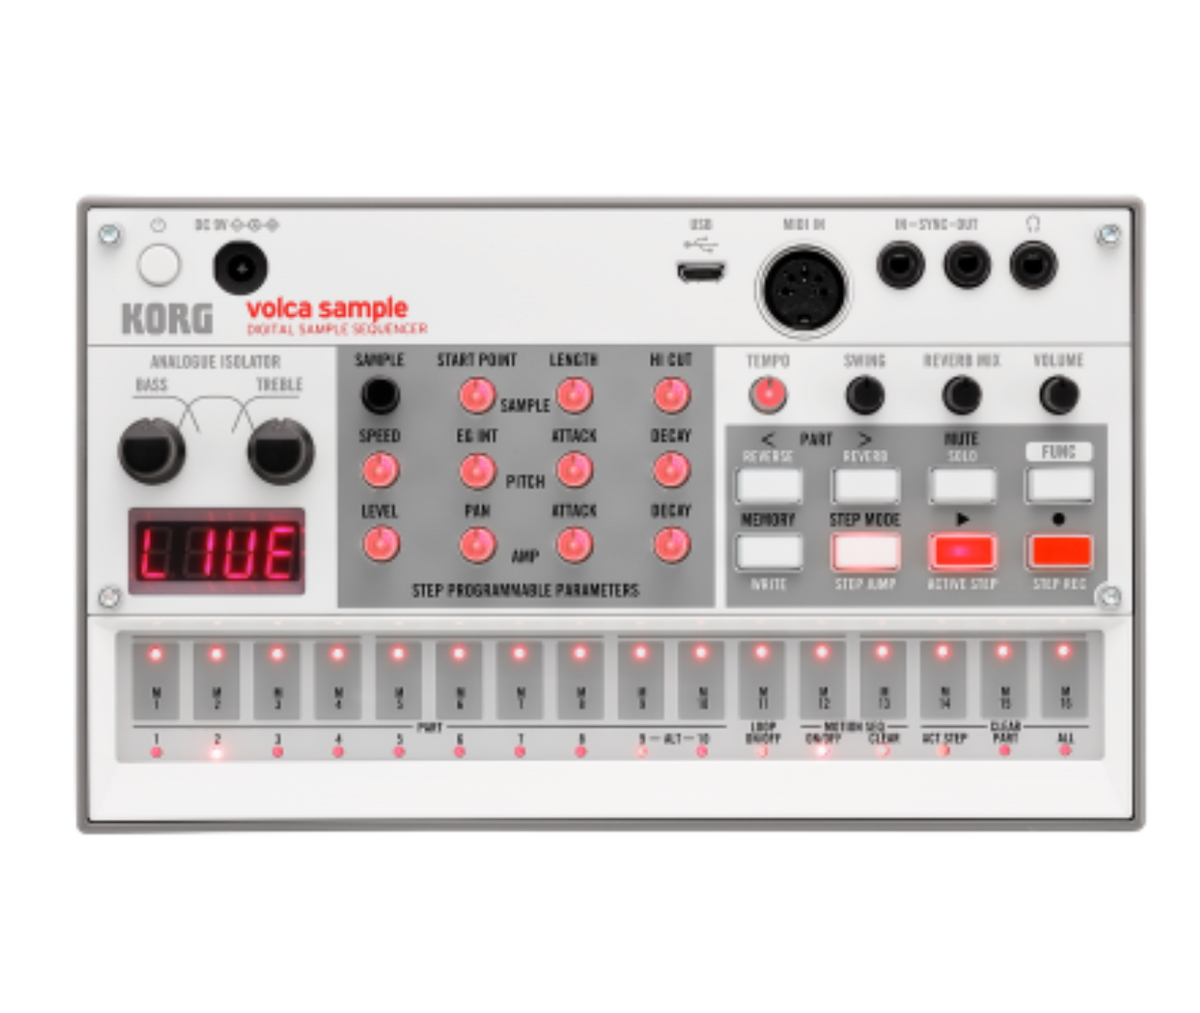 KORG volca sample2 Digital Sample Sequencer Best Synthesizer Compact and Powerful Sample-based Drum Machine with Micro USB Port Connection